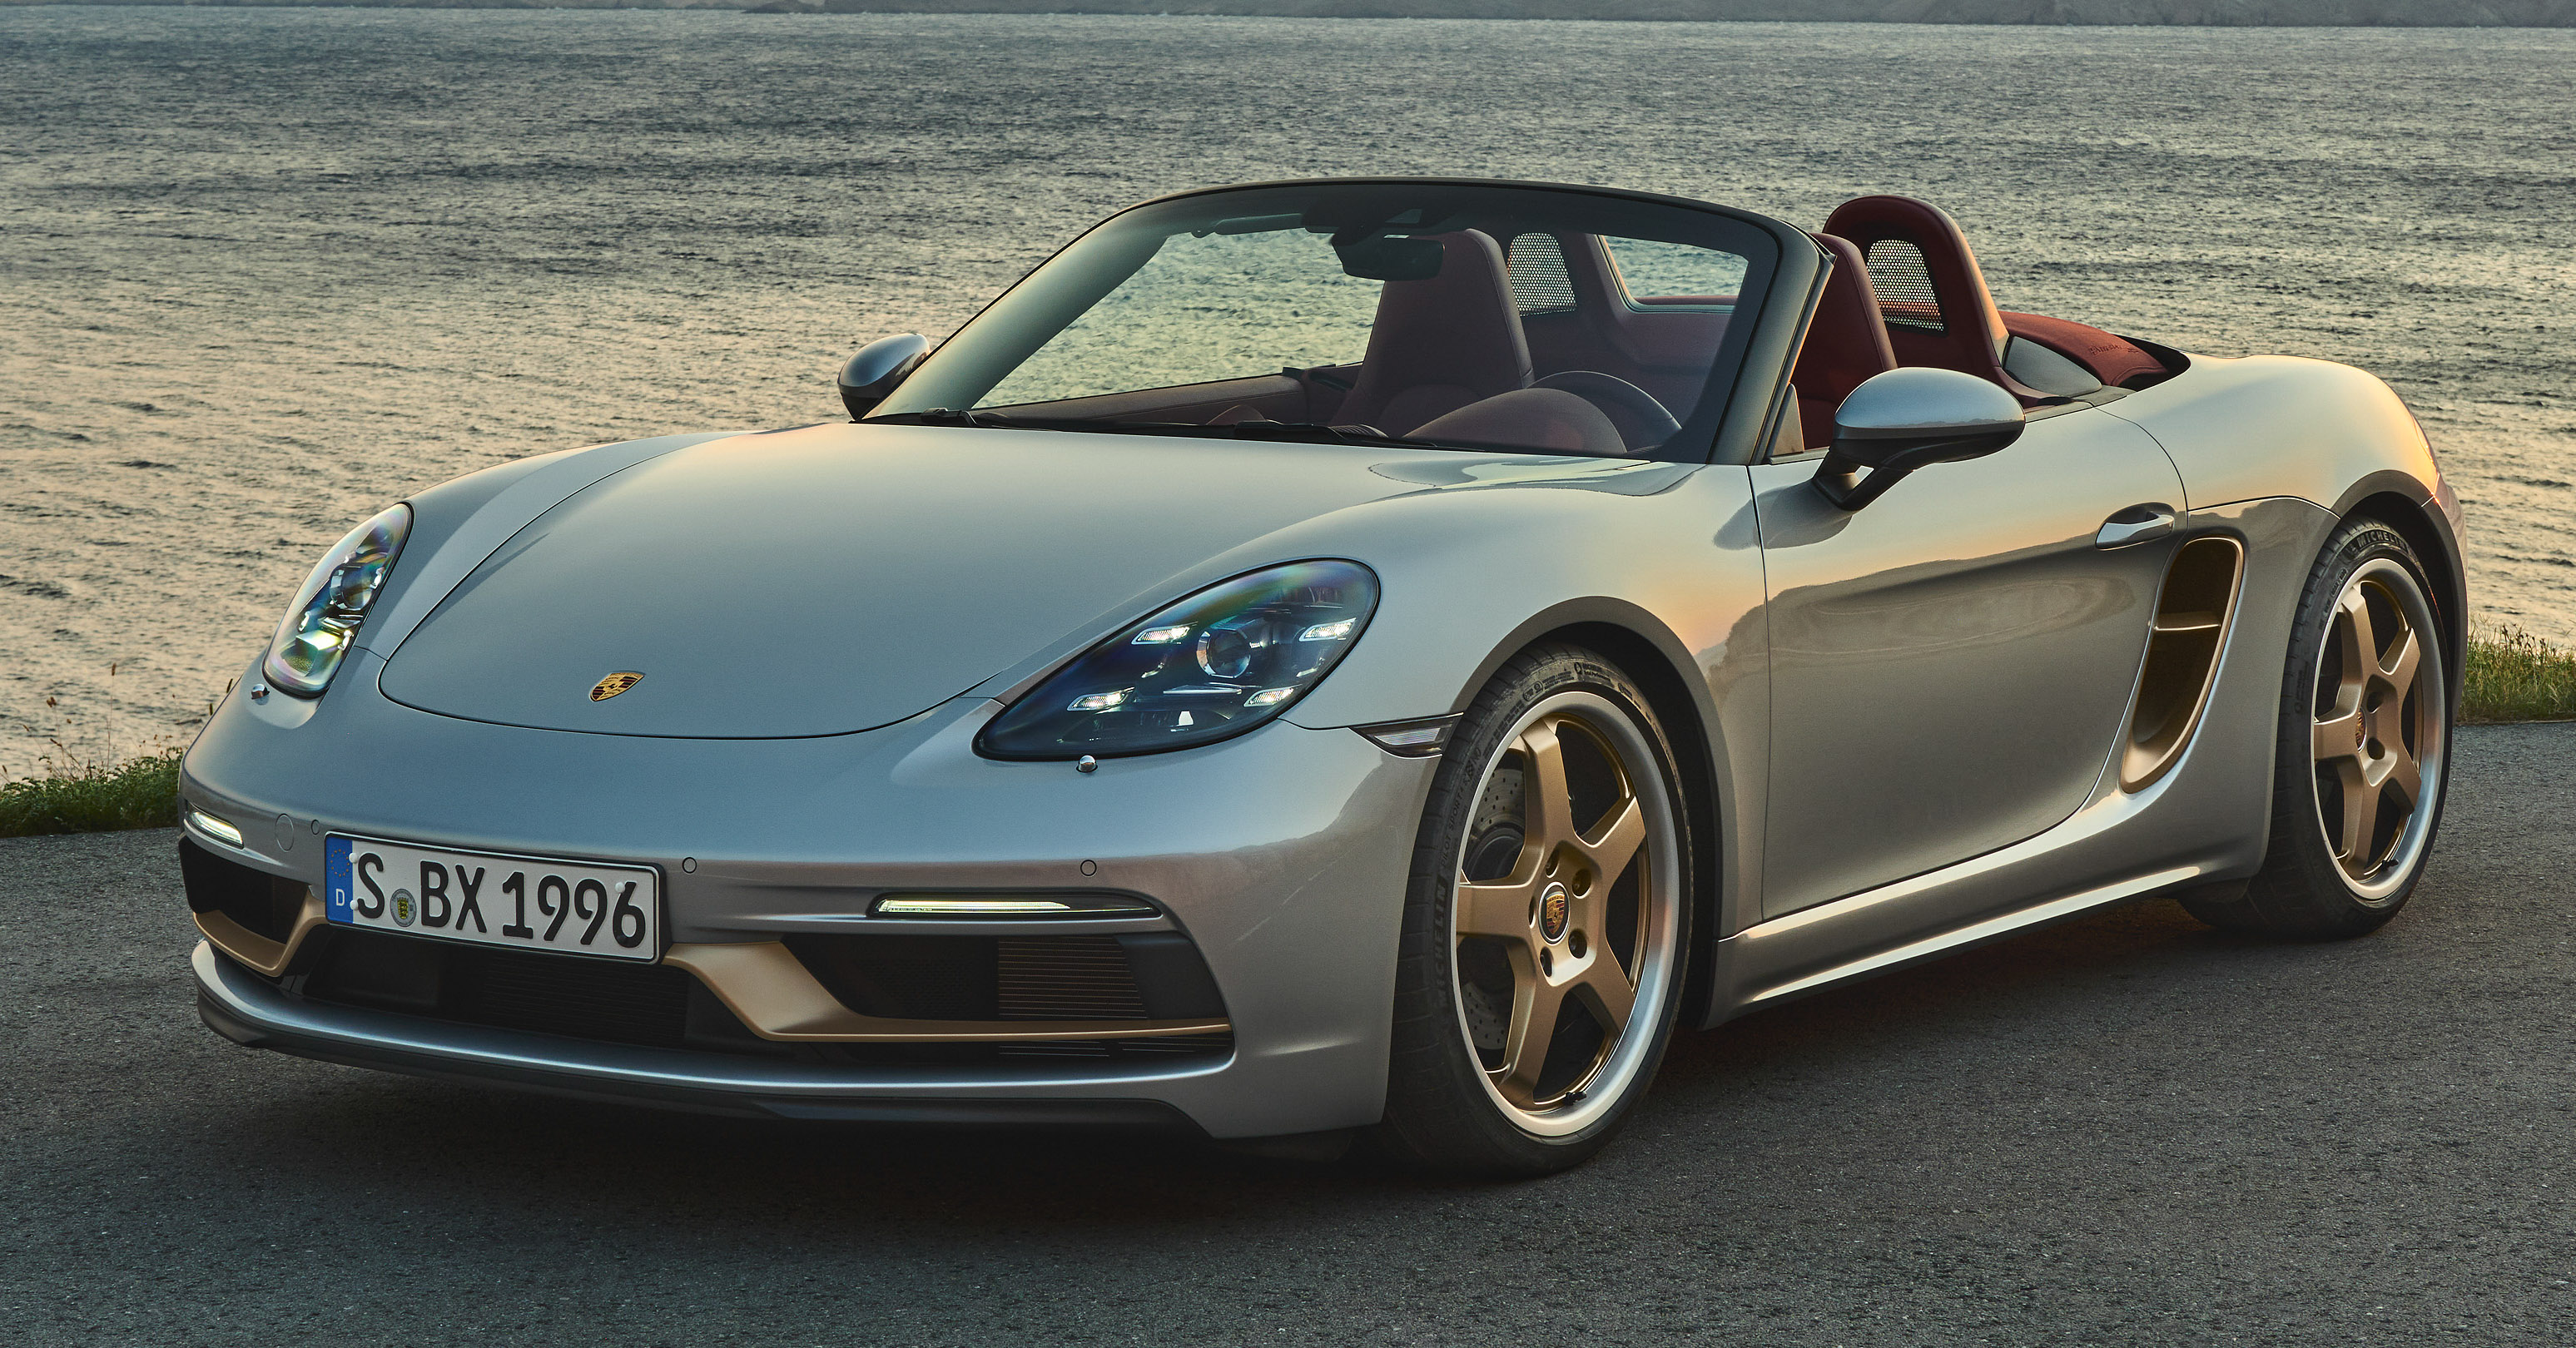 Porsche Boxster 25 Years Revealed As Tribute Model Based On 718 Boxster Gts 4 0 Limited To 1 250 Units Paultan Org